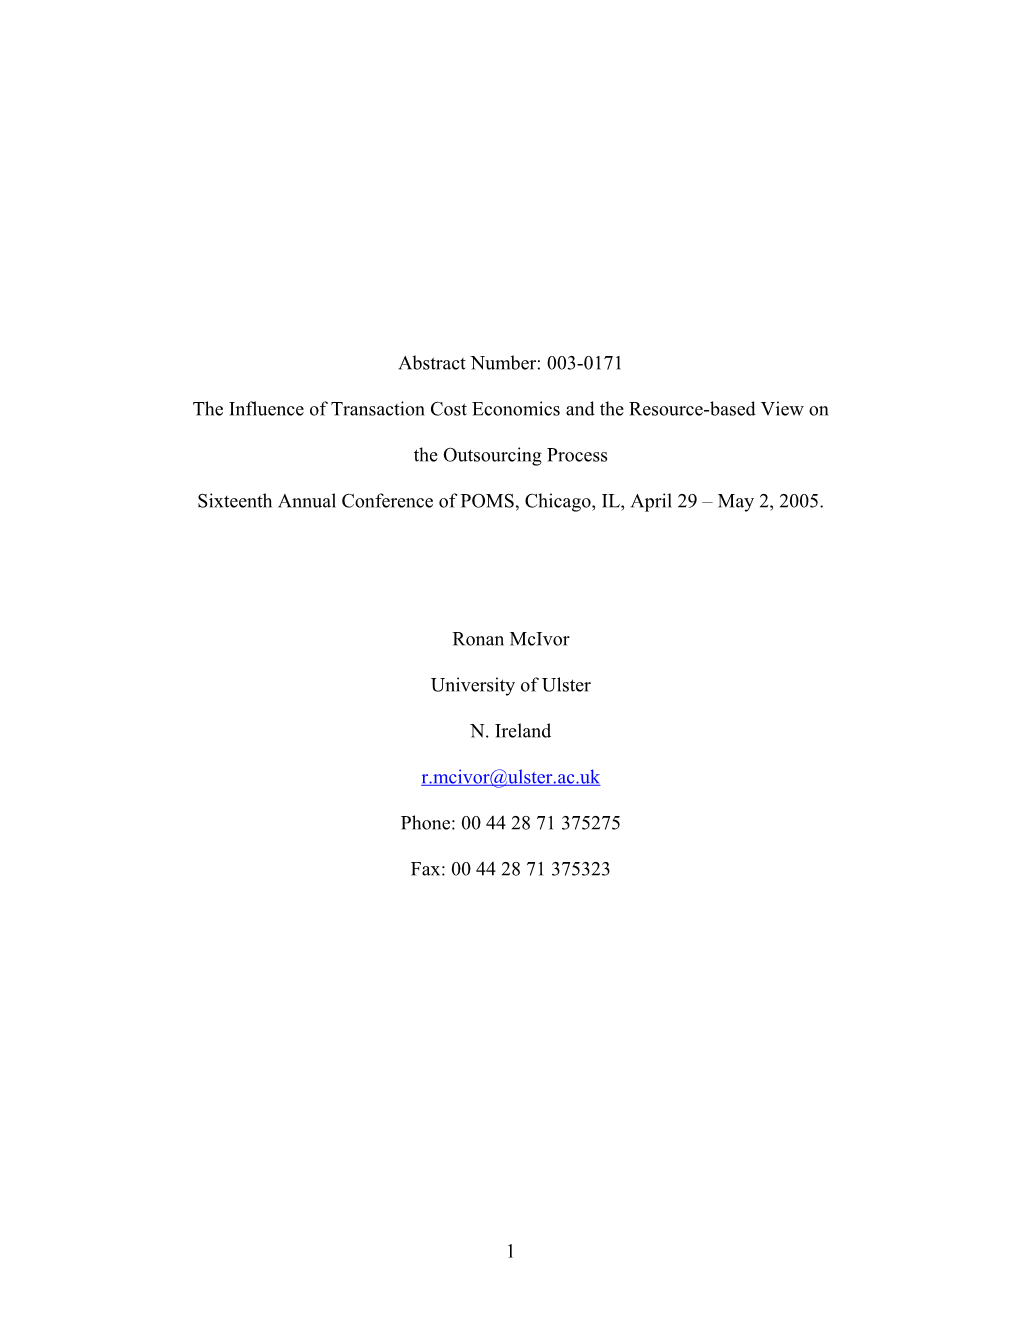 The Influence of Transaction Cost Economics and the Resource-Based View On